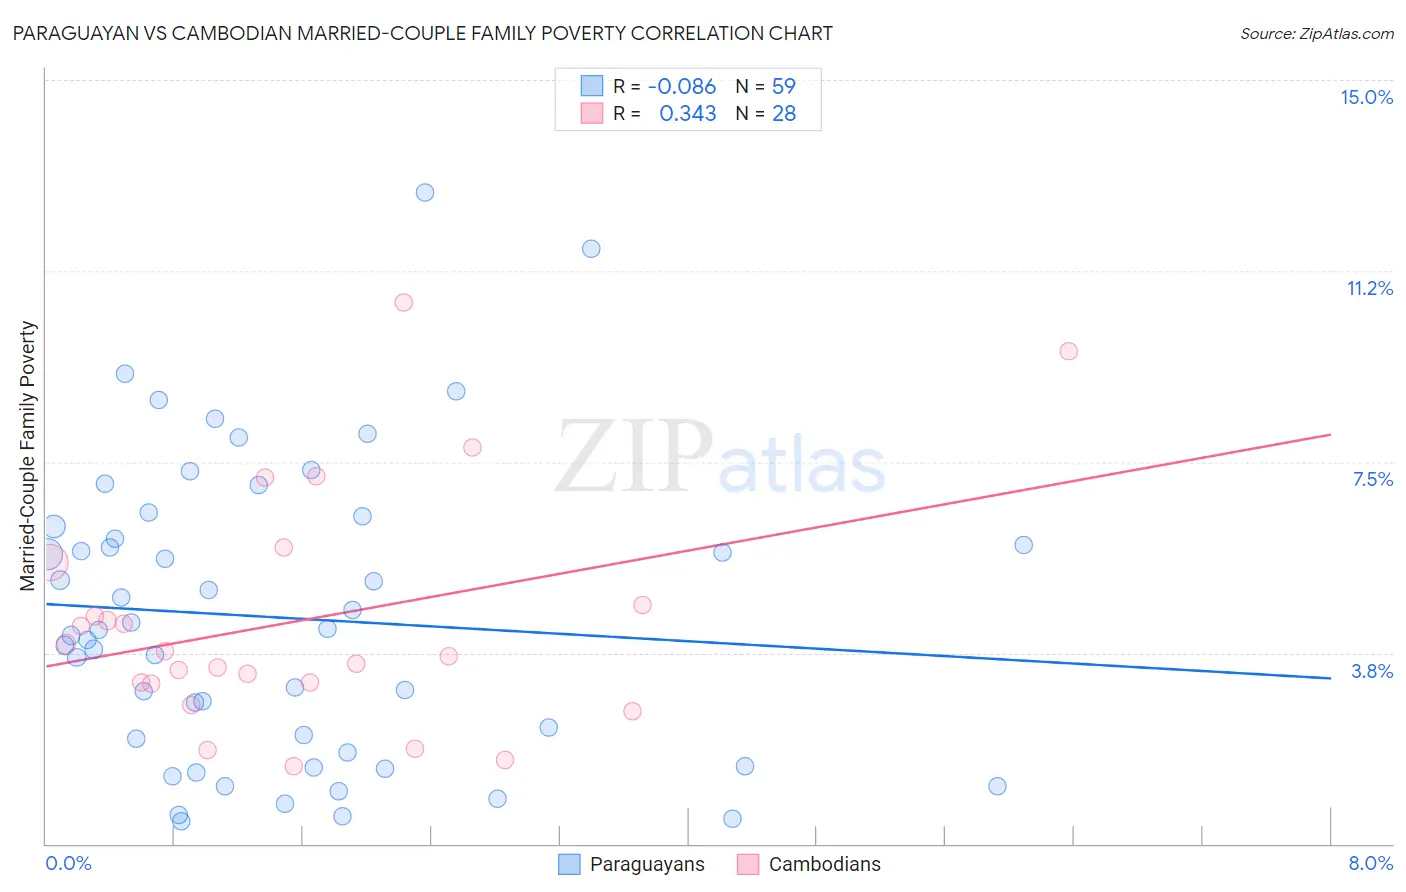 Paraguayan vs Cambodian Married-Couple Family Poverty